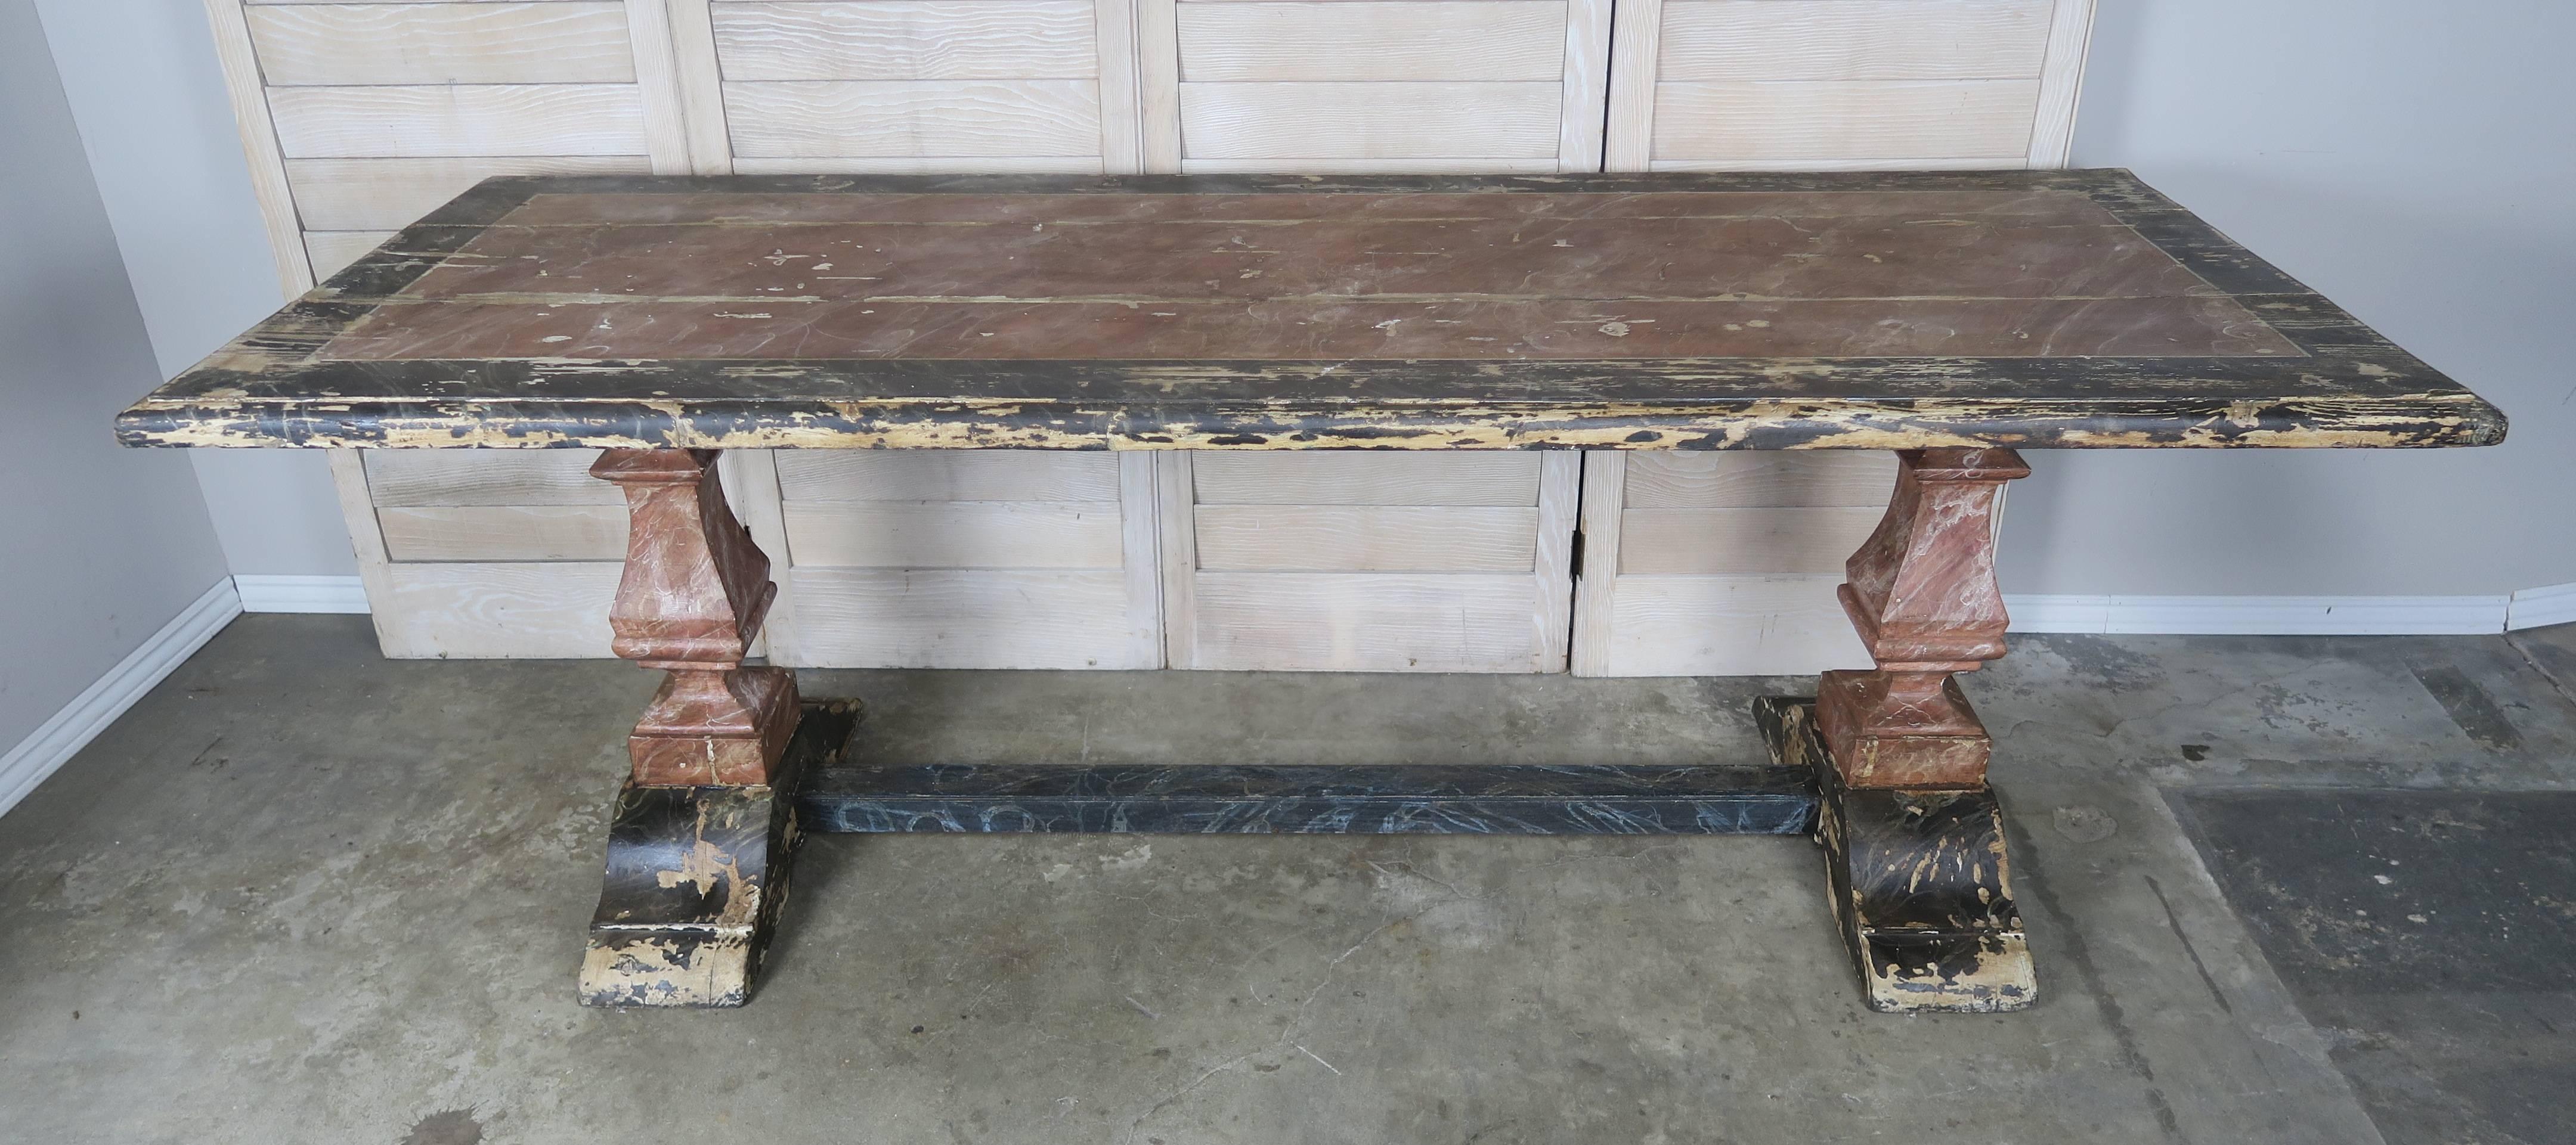 19th century Italian painted trestle table finished in a faux marble. The table stands on two heavy pedestal bases connected by a center stretcher. Worn & chipped paint throughout.